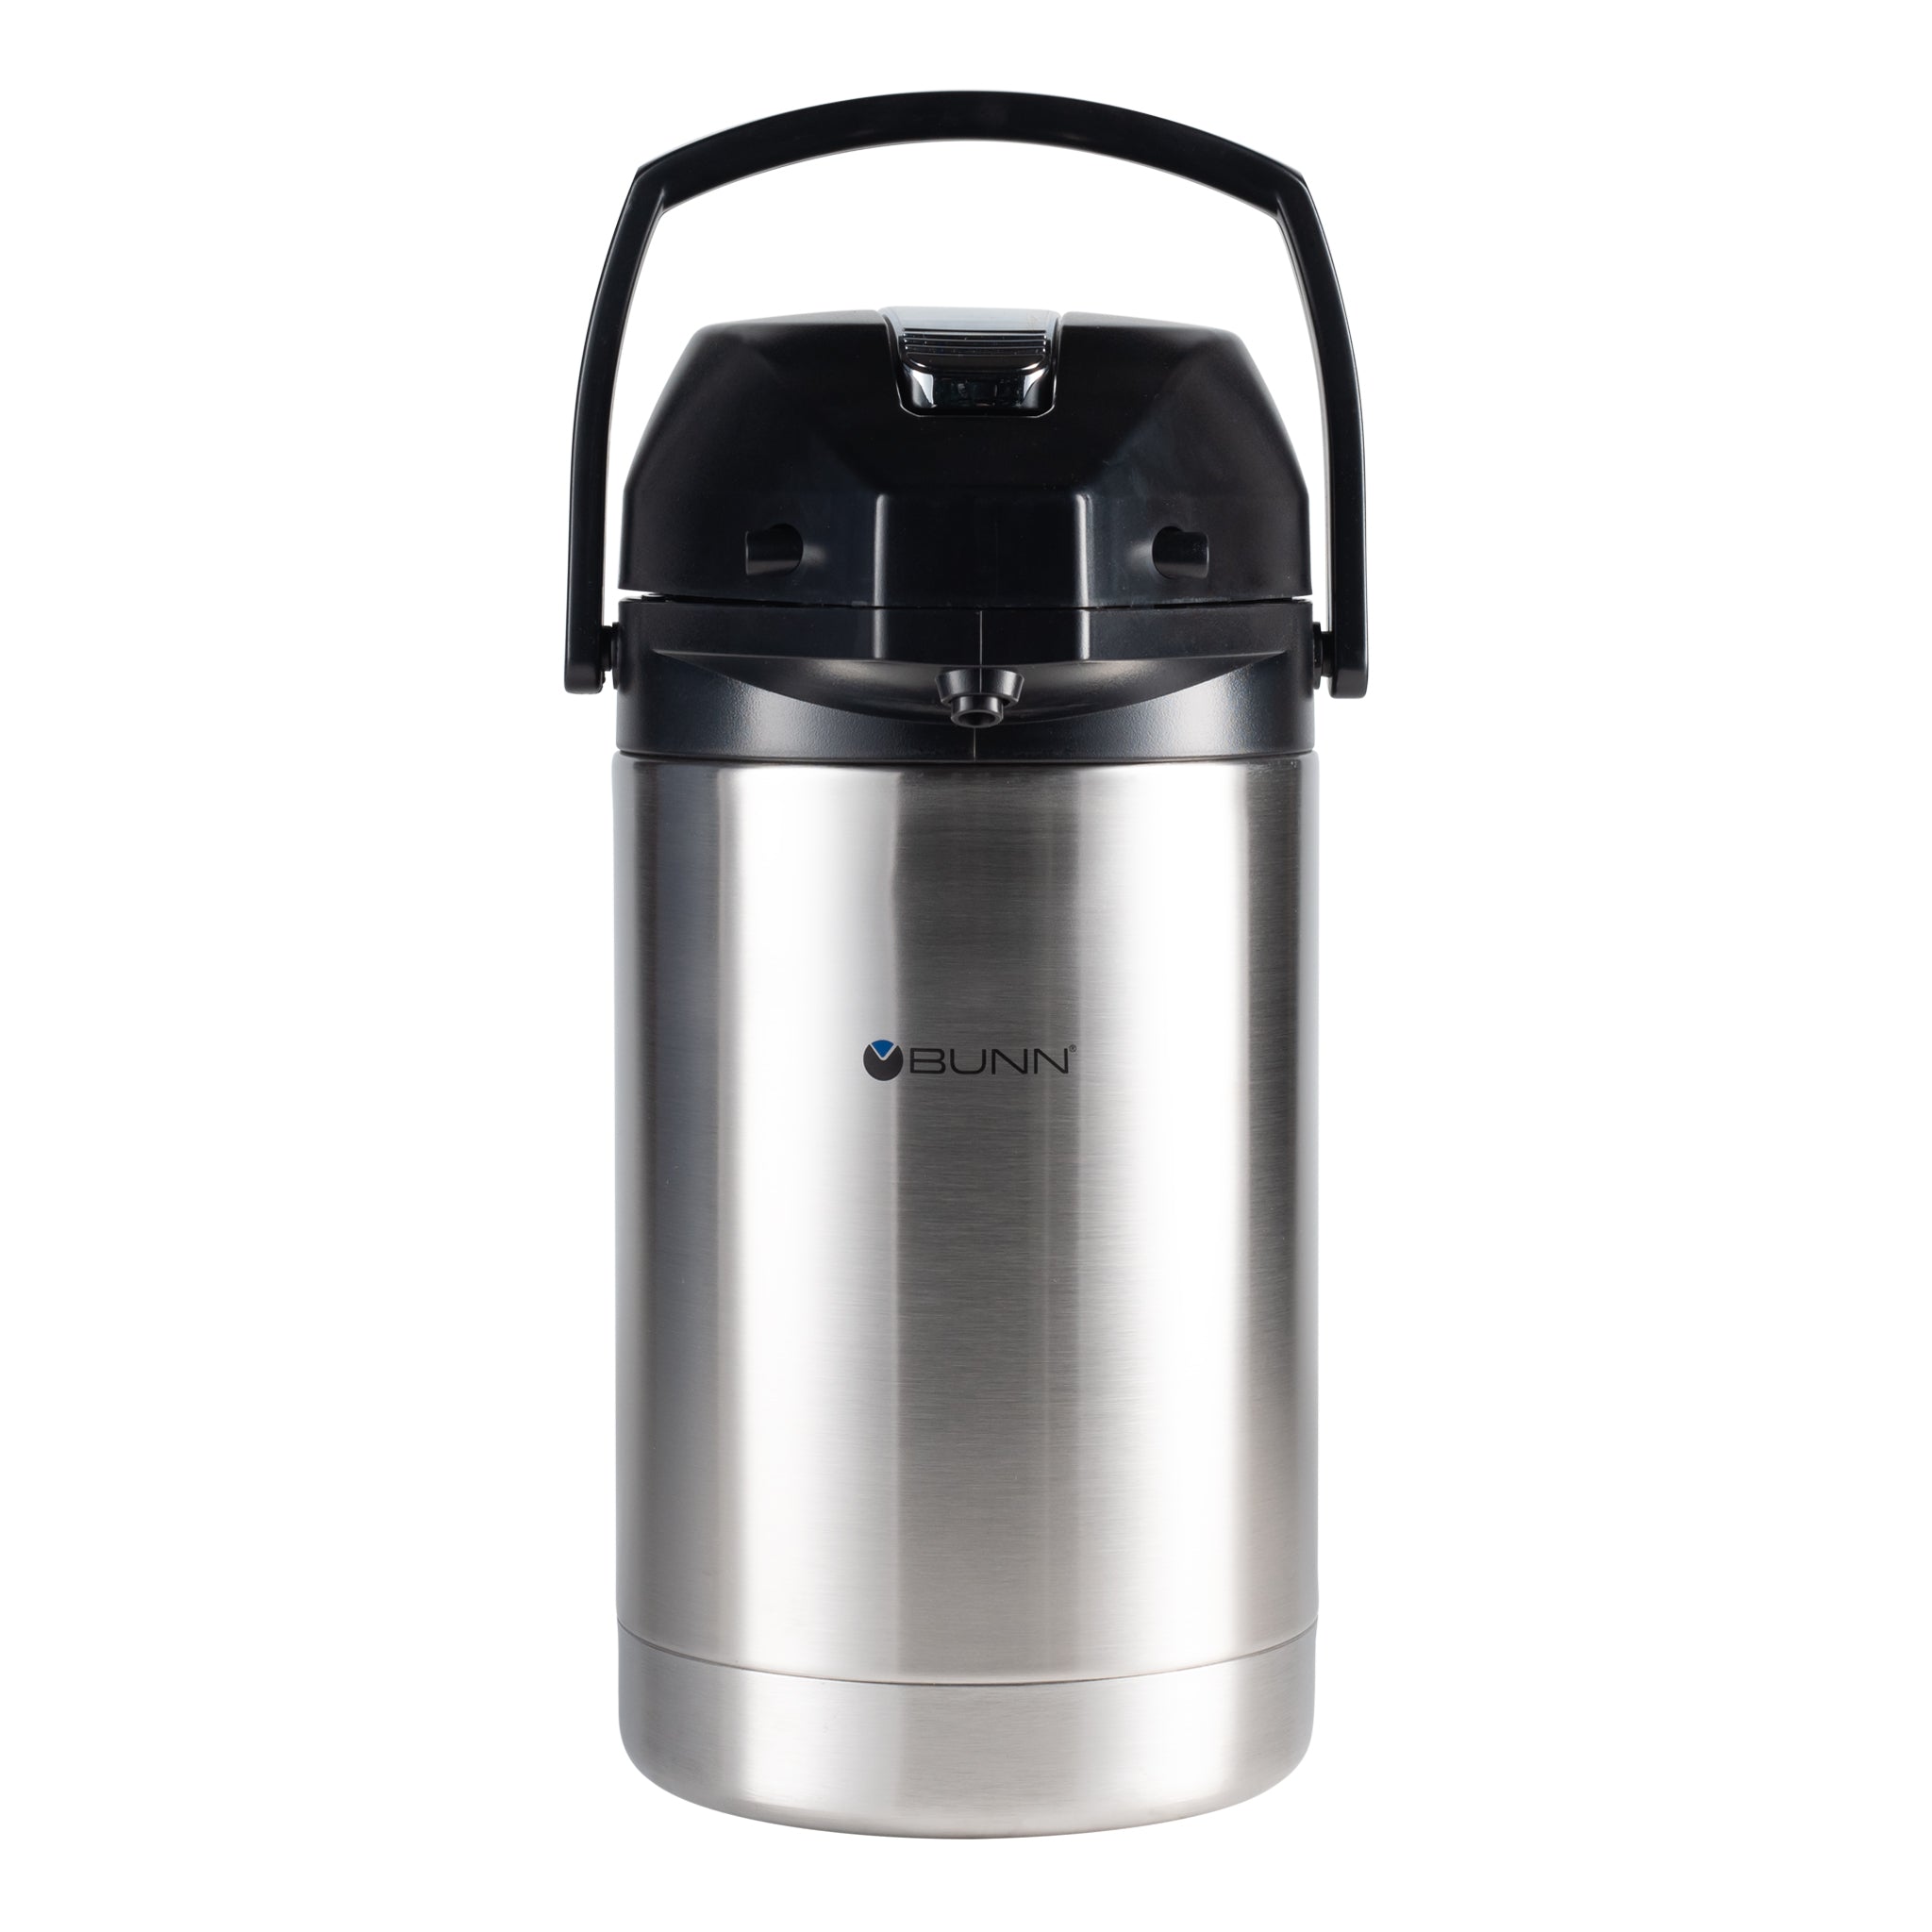 Thermos FN370 1.5 Liter Stainless Steel Vacuum Insulated Carafe